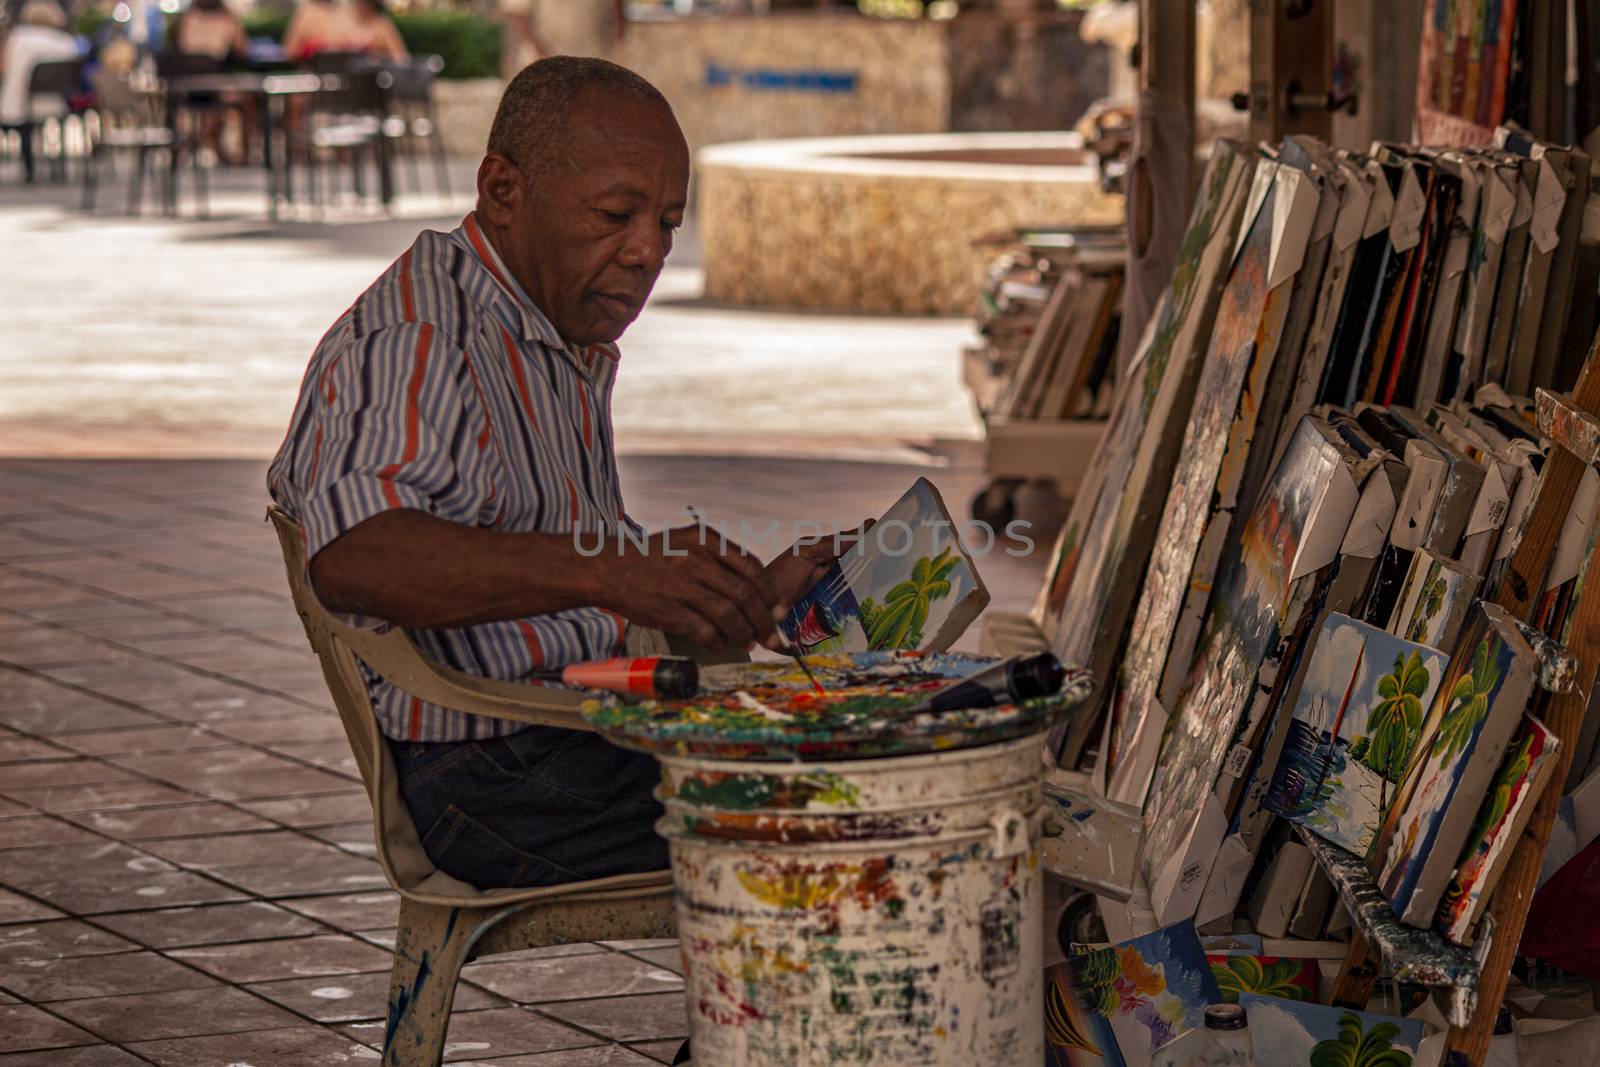 BAYAHIBE, DOMINICAN REPUBLIC 4 JANUARY 2020: Dominican painter paints